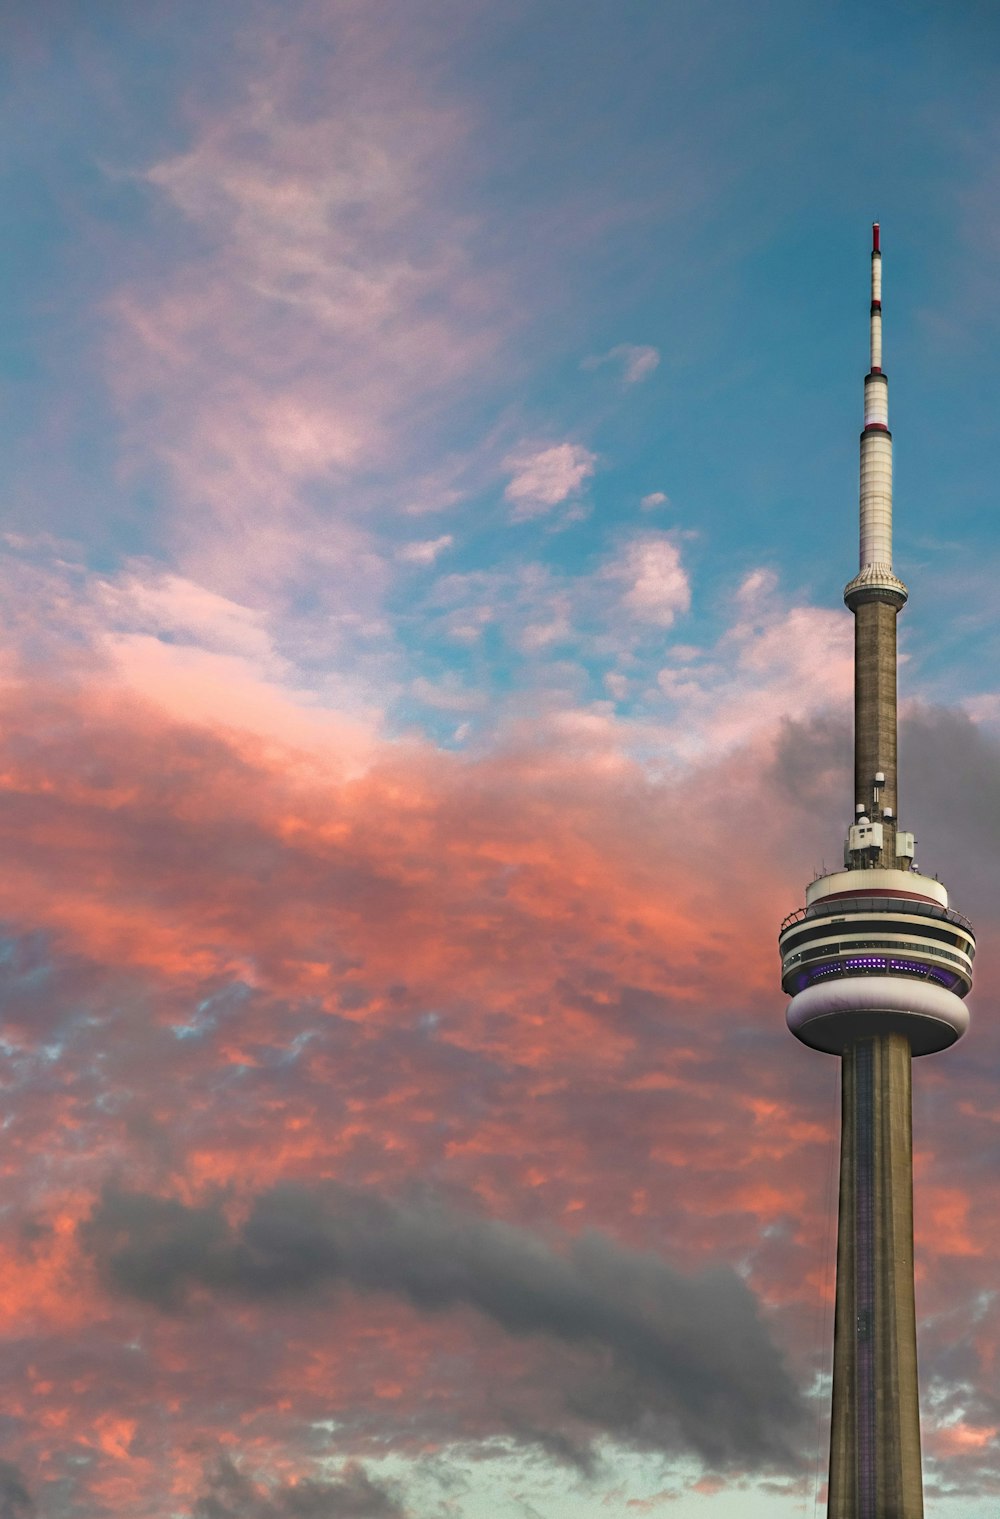 CN Tower under red and gray clouds